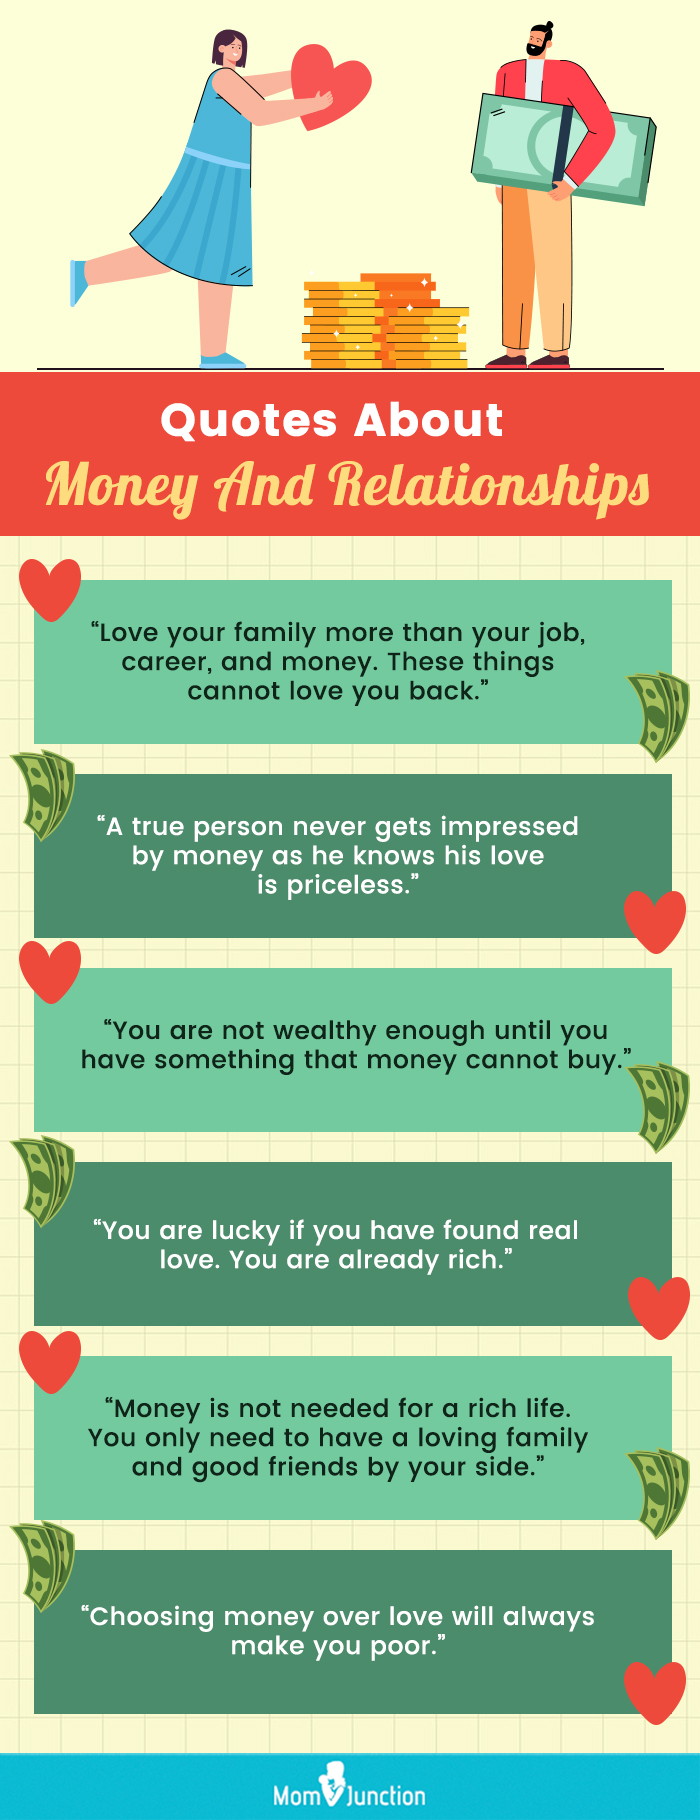 money is everything quotes